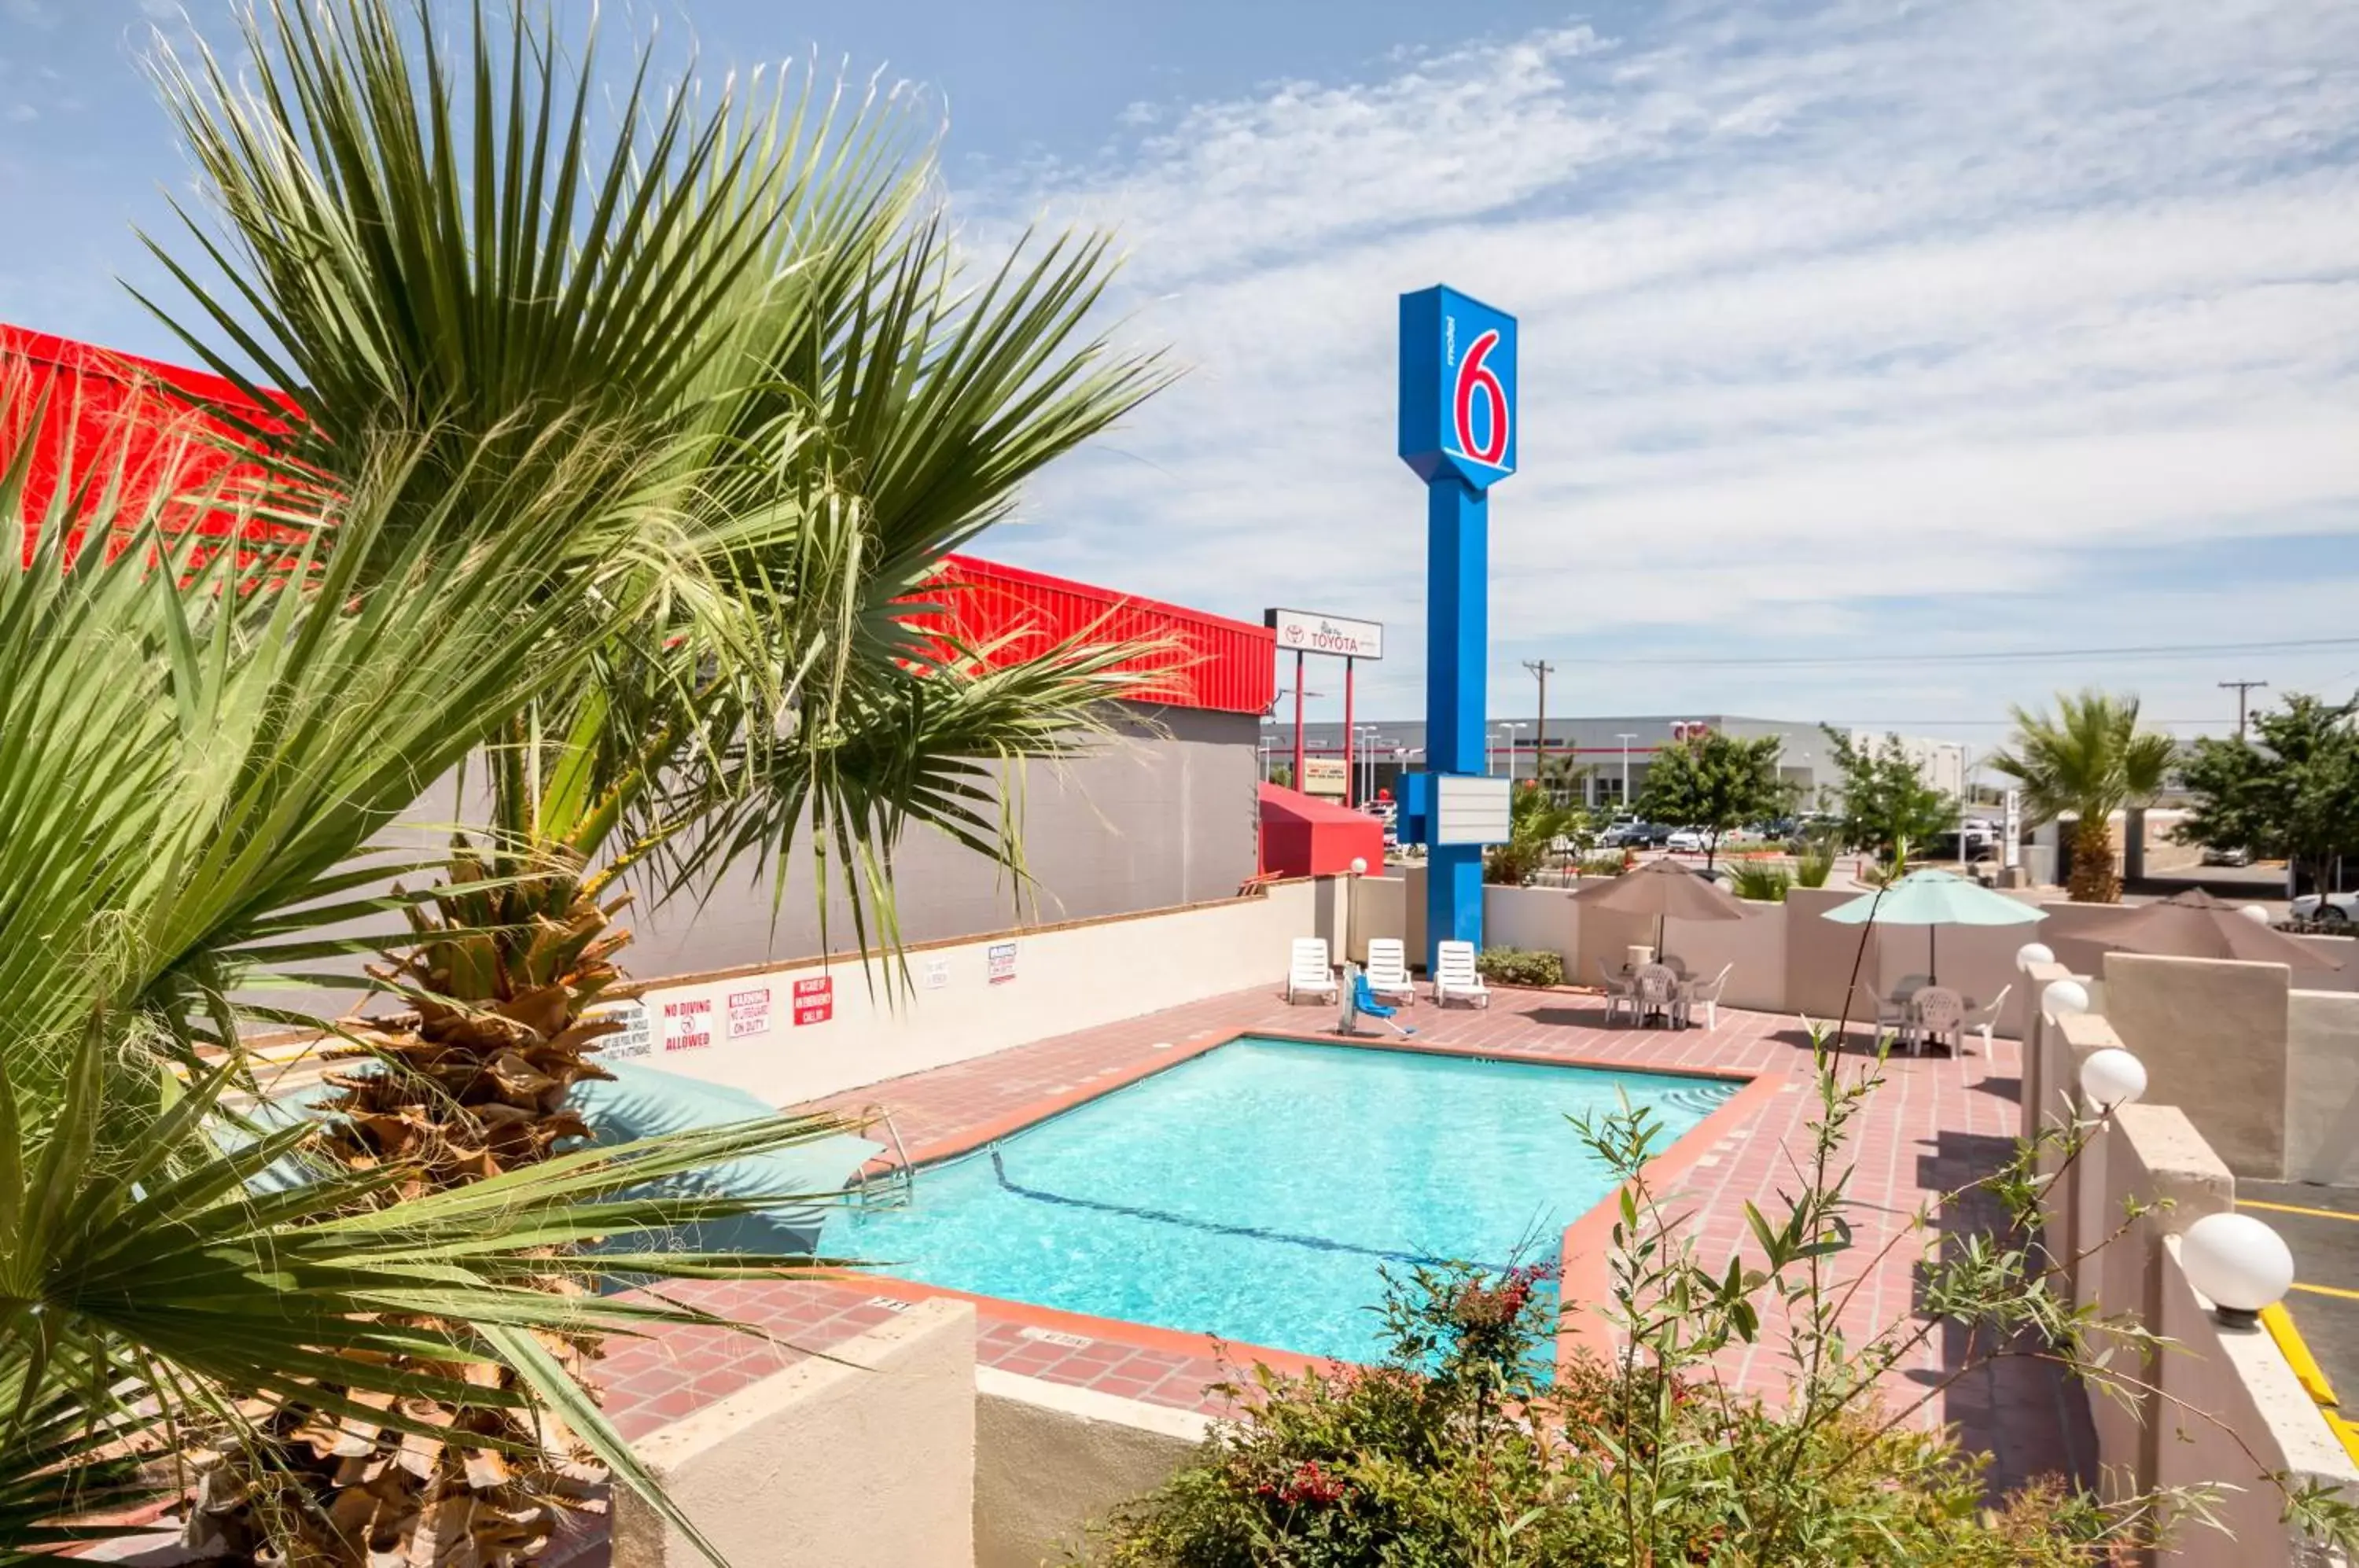 Swimming pool, Pool View in Motel 6-El Paso, TX - Airport - Fort Bliss